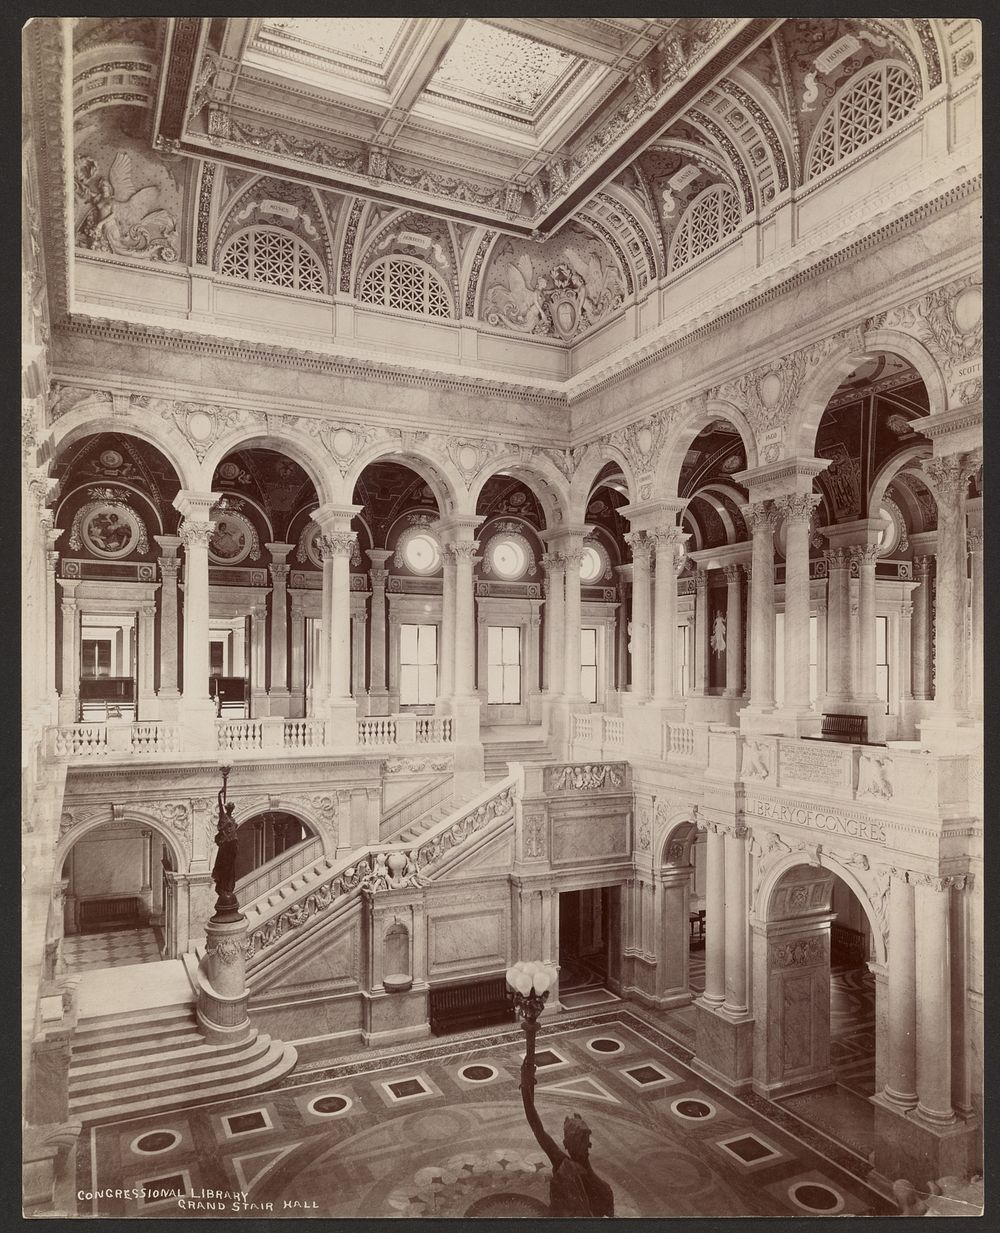 Congressional Library: Grand Stair Hall by Levin C Hardy